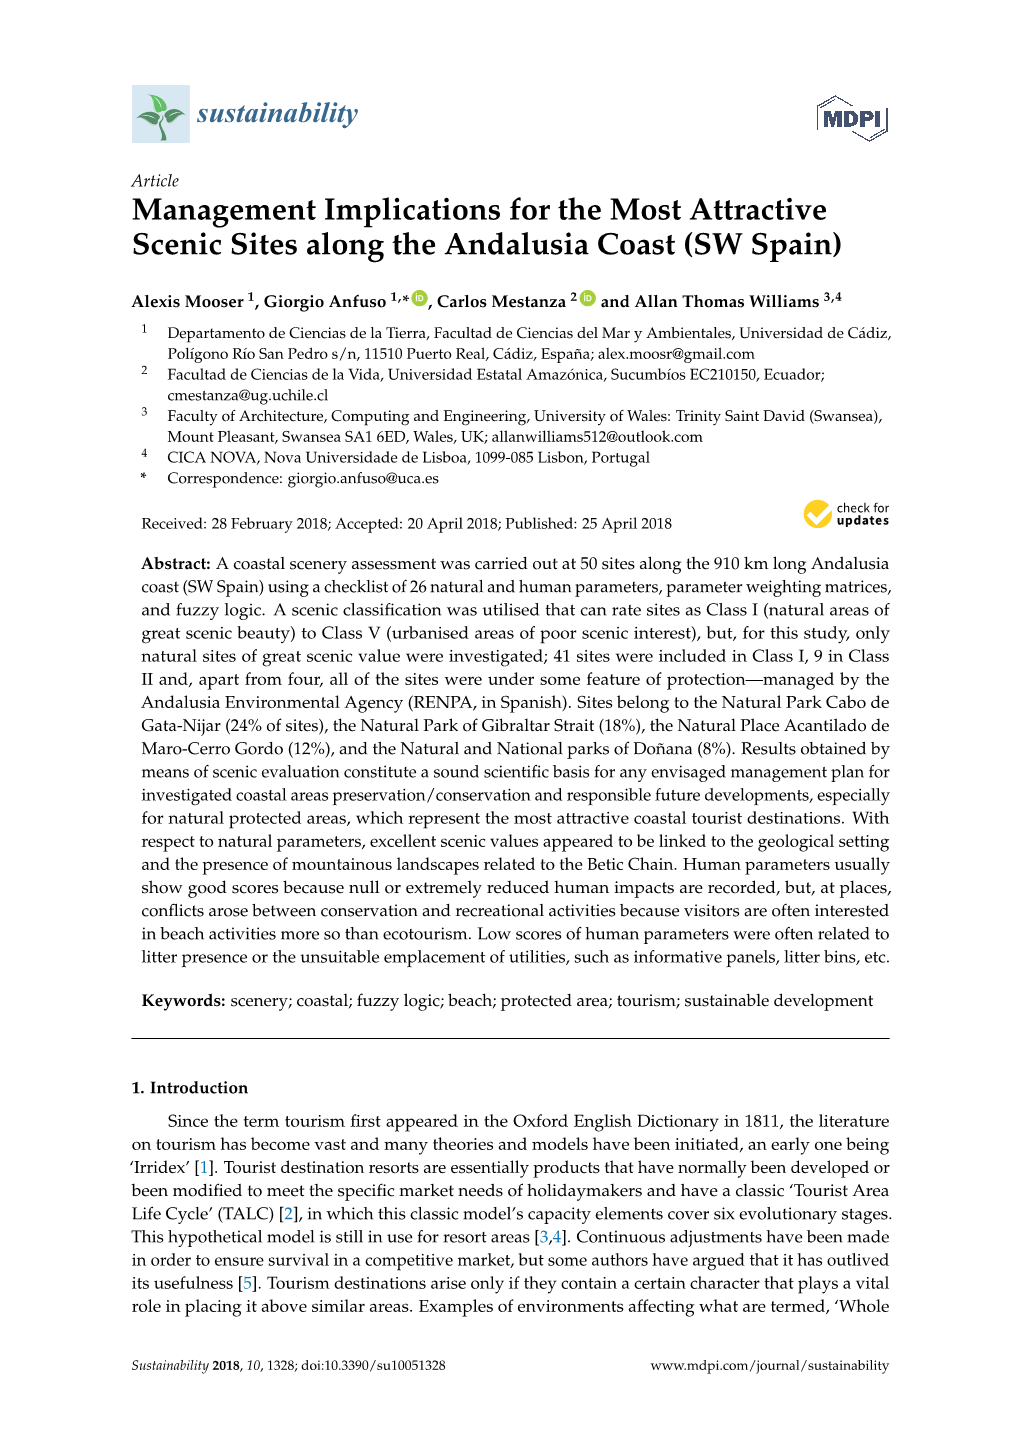 Management Implications for the Most Attractive Scenic Sites Along the Andalusia Coast (SW Spain)